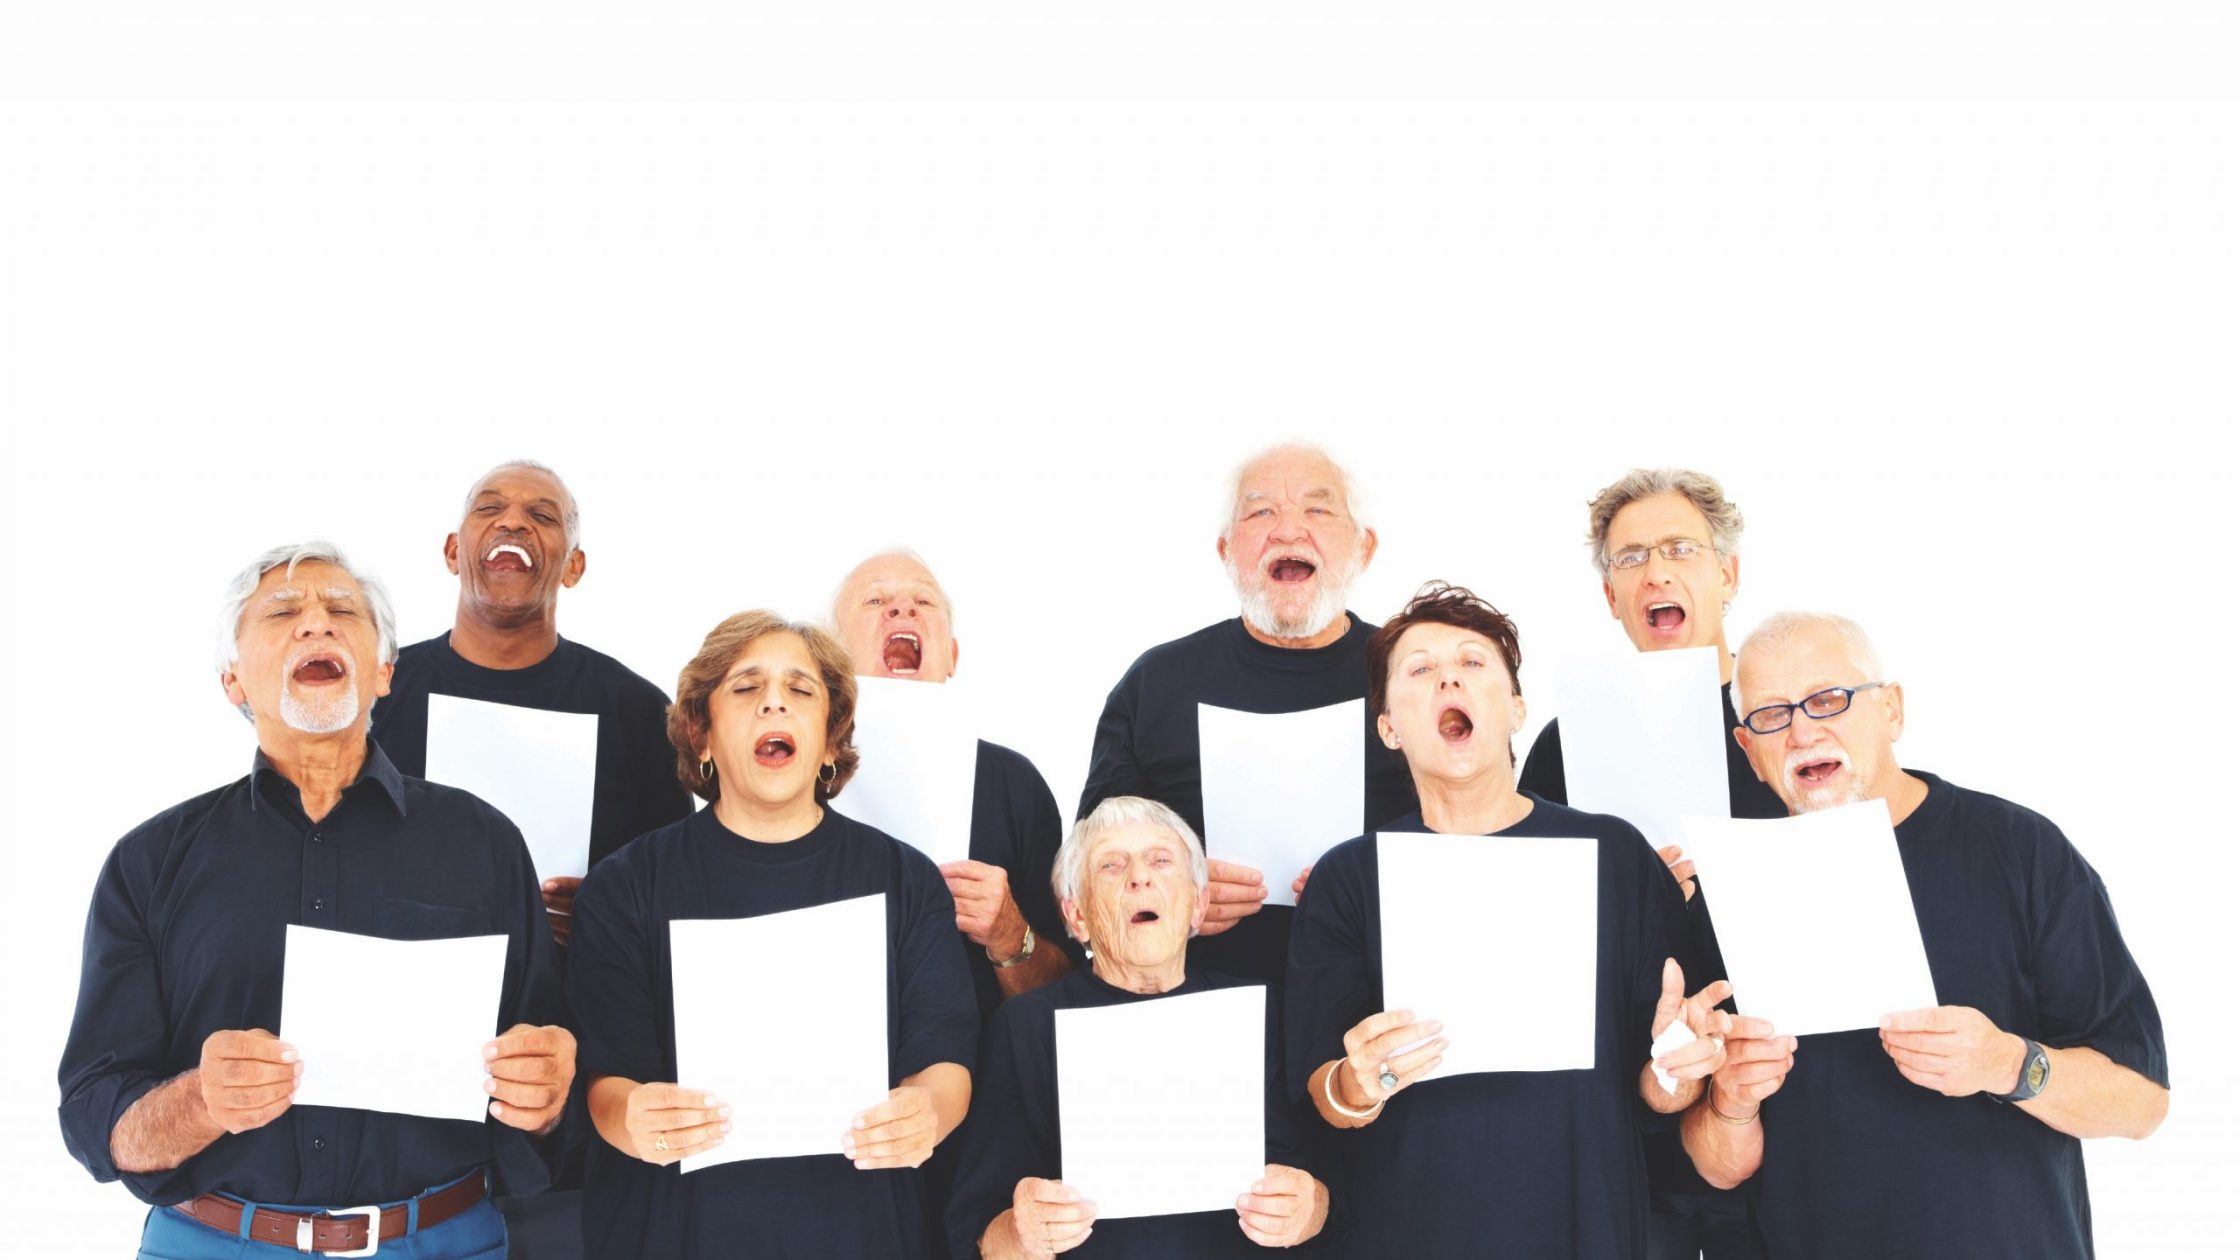 group of choristers against white background